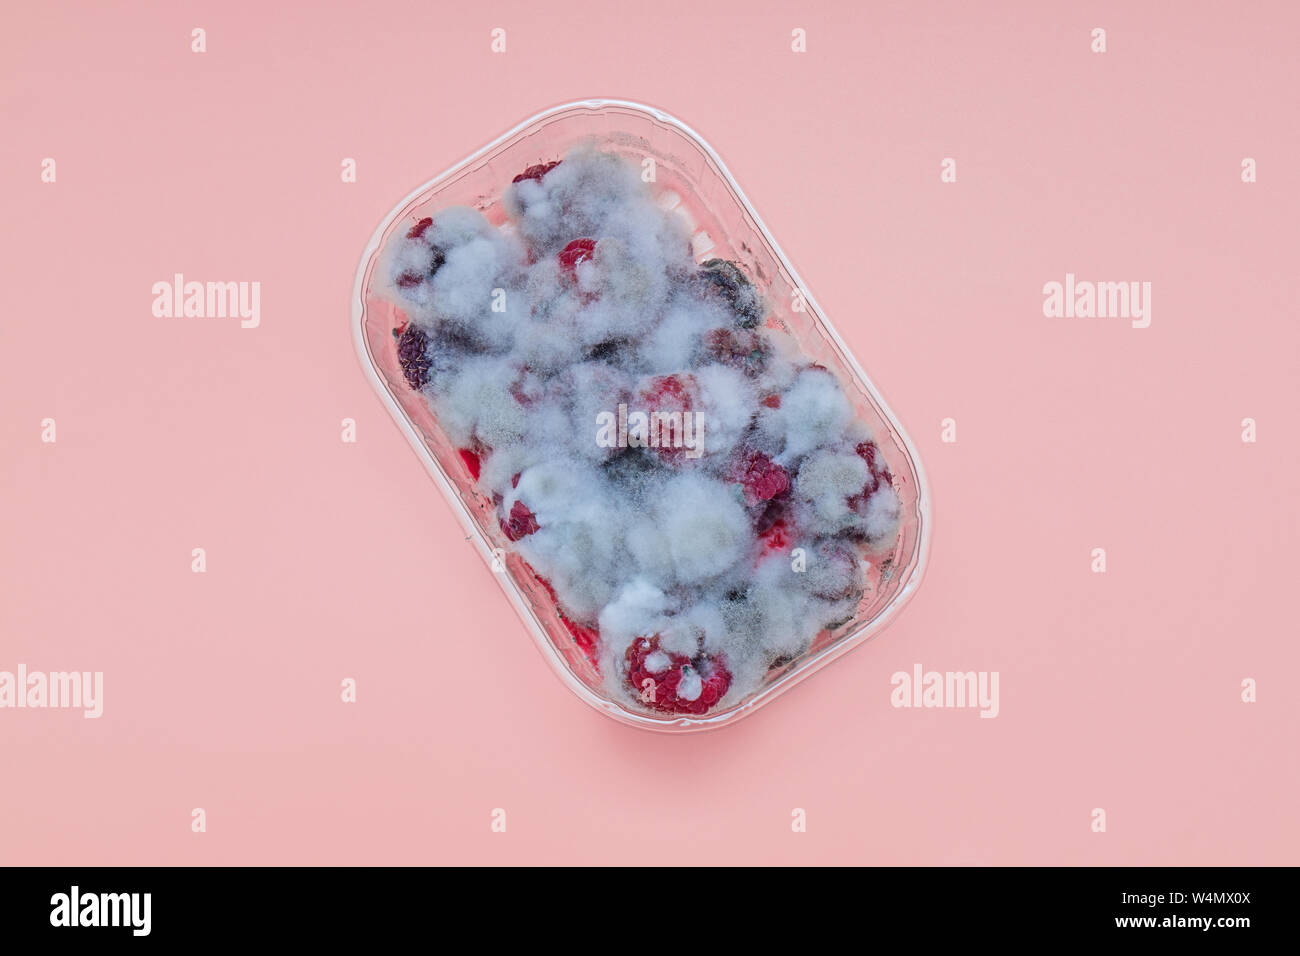 Closeup of rotten moldy raspberry in plastic box isolated on pink background. Damaged ripe berry with Botrytis Cinerea mold, top view Stock Photo